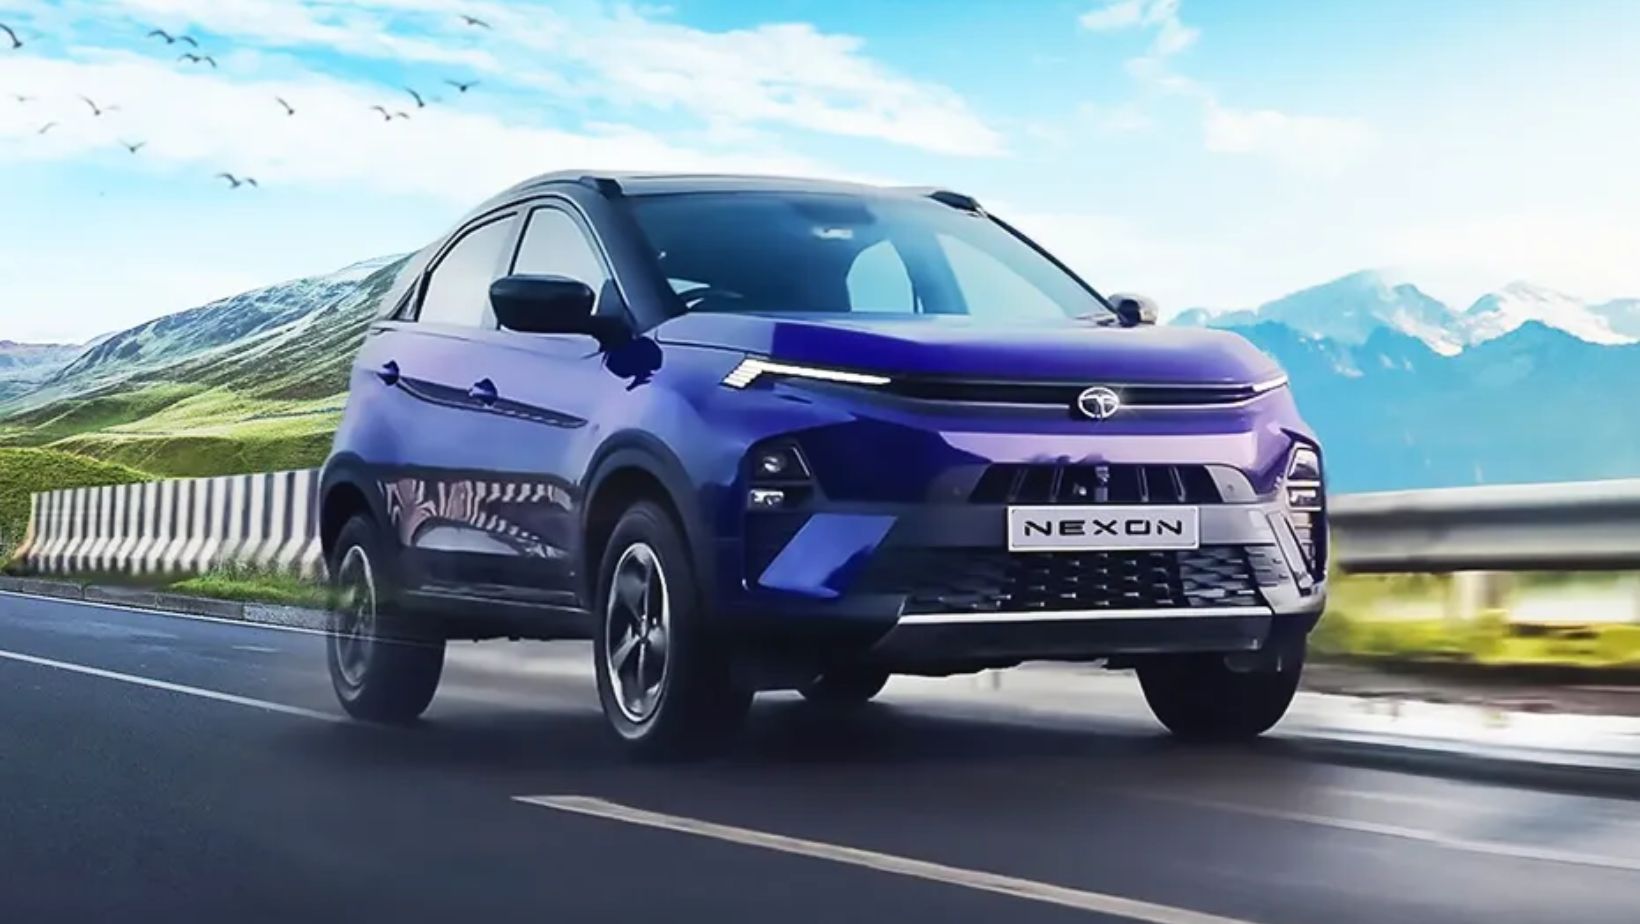 Tata Motors launches feature-rich Nexon facelift SUV at Rs 8 lakh